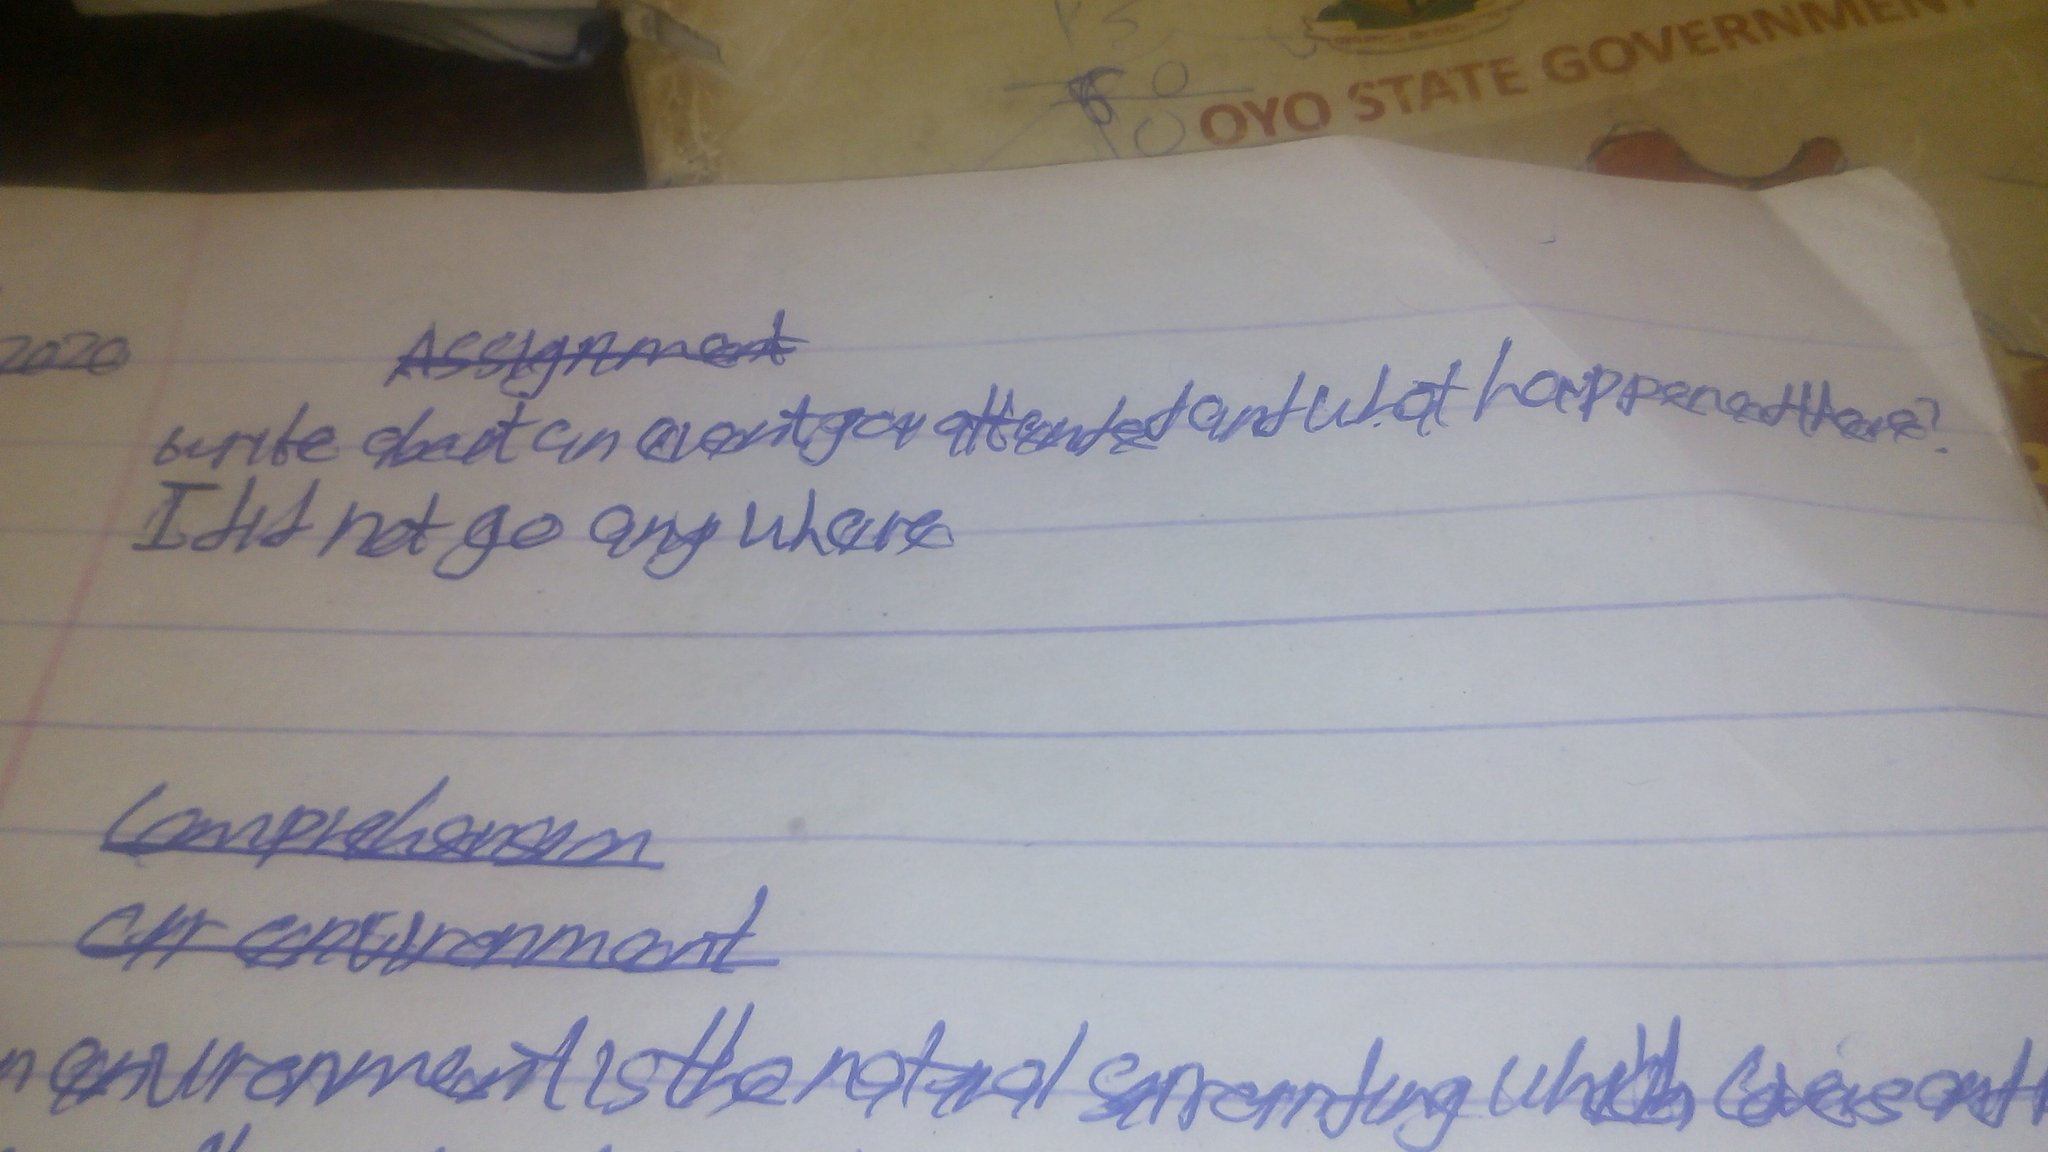 Corps member serving in Ibadan shares the hilarious "essay" one of his student wrote